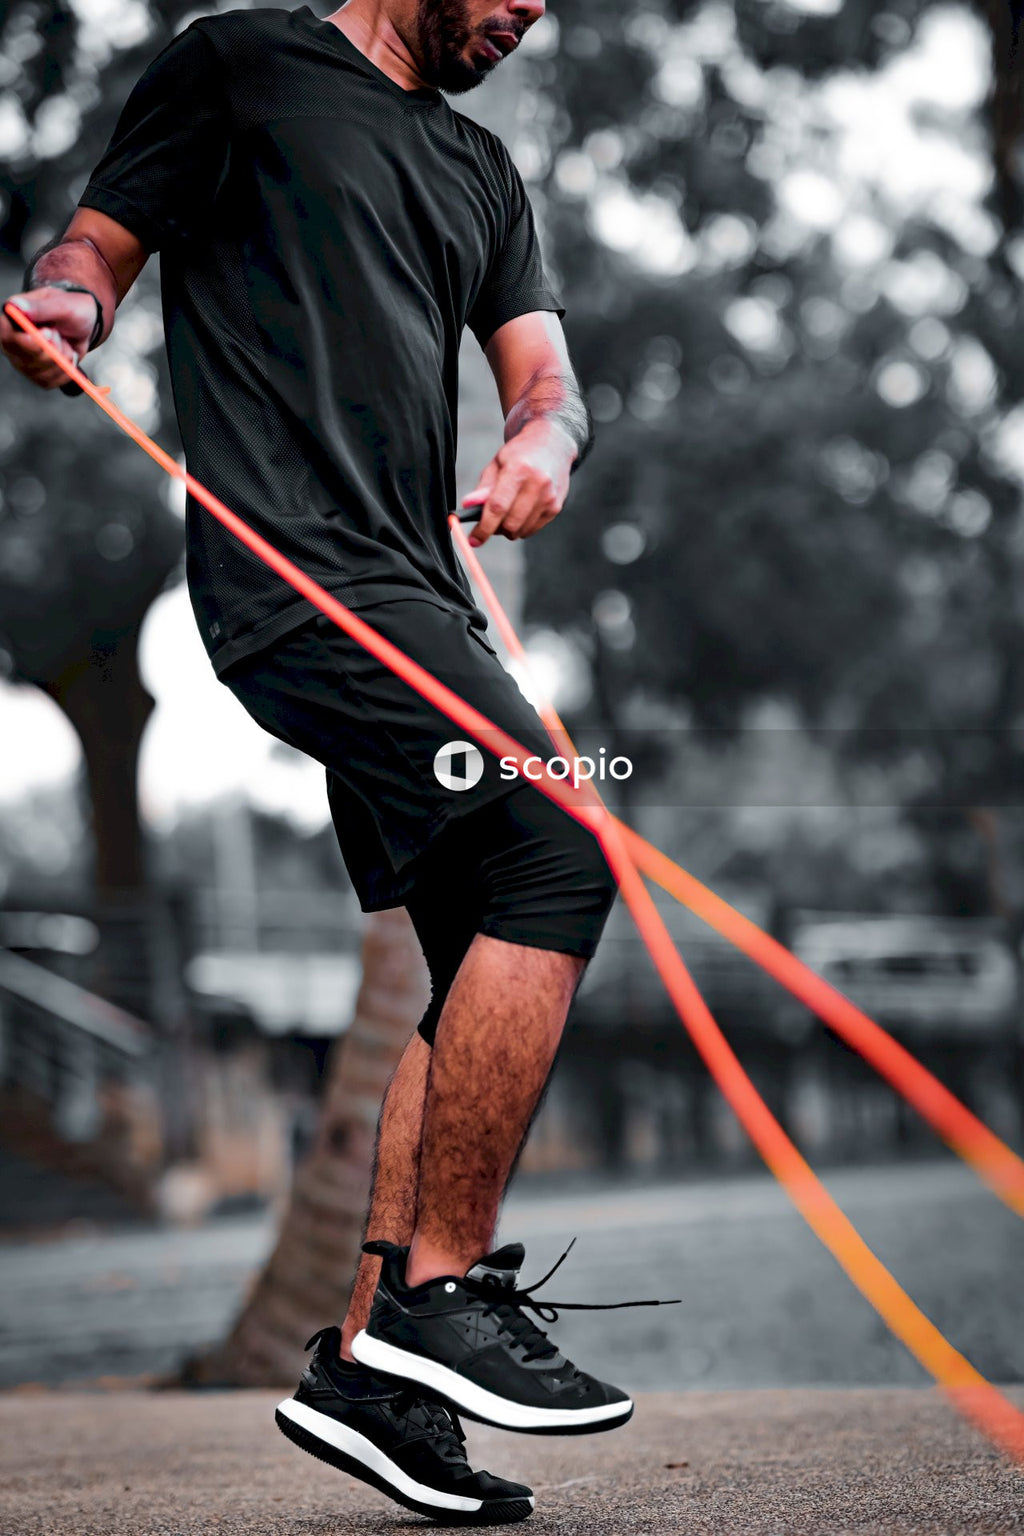 Man in black long sleeve shirt and black shorts holding red rope